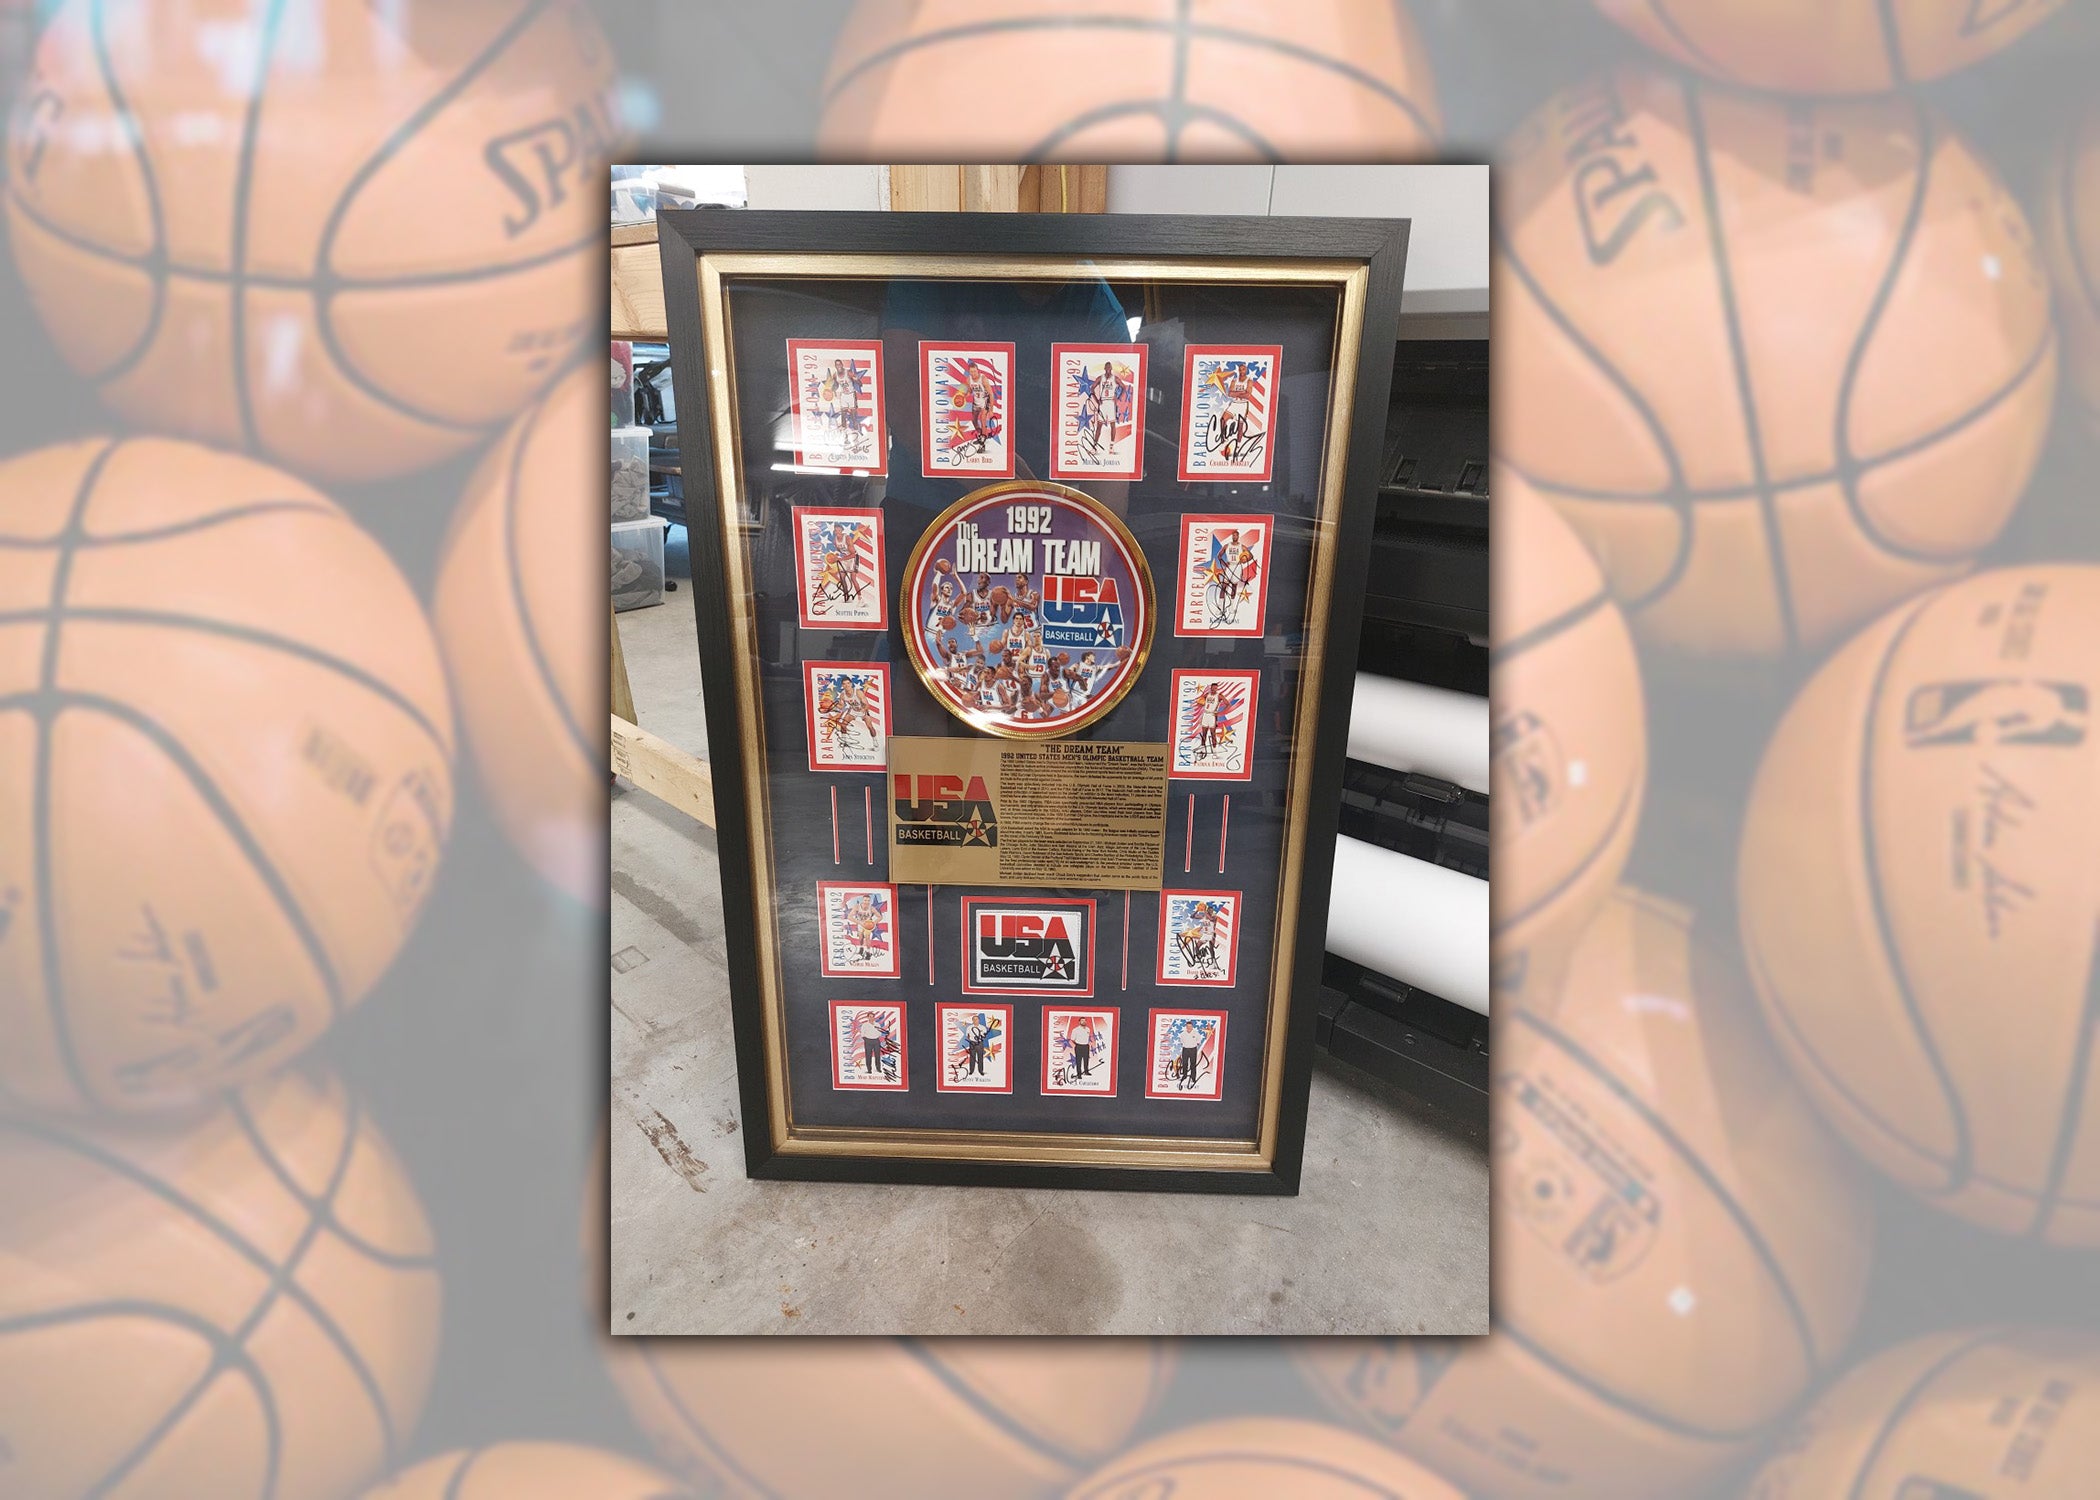 Michael Jordan, Larry Bird, Chuck Daly 1992 Dream Team MASTER SET DREAM TEAM 1991 SKYBOX USA basketball cards signed and framed 24x36 with proof